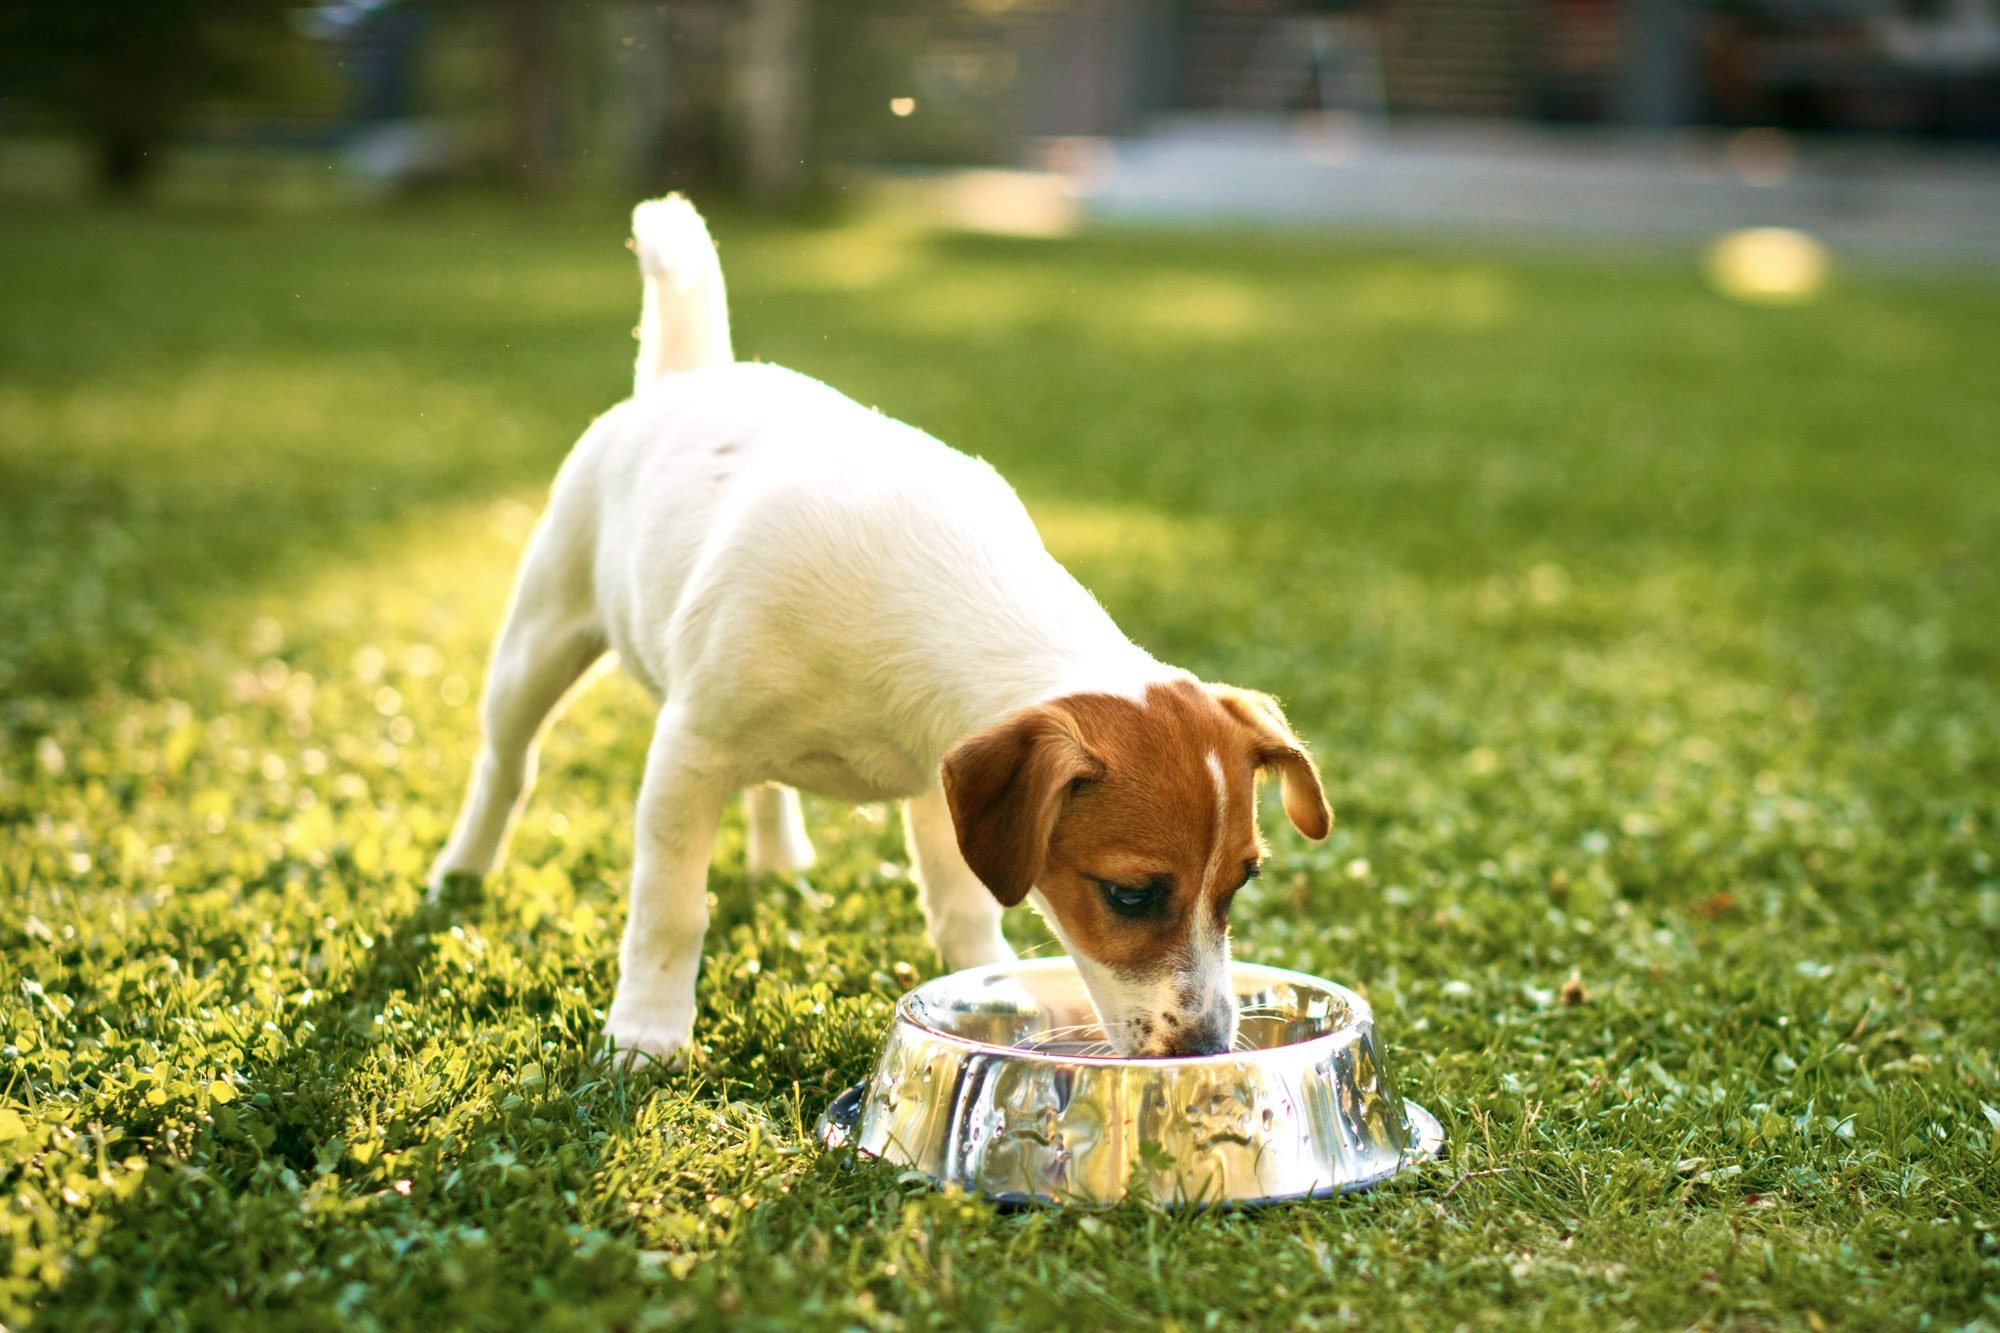 Dog Drinking From Bowl In Shade Gettyimages 1285465321 Pkedit 1